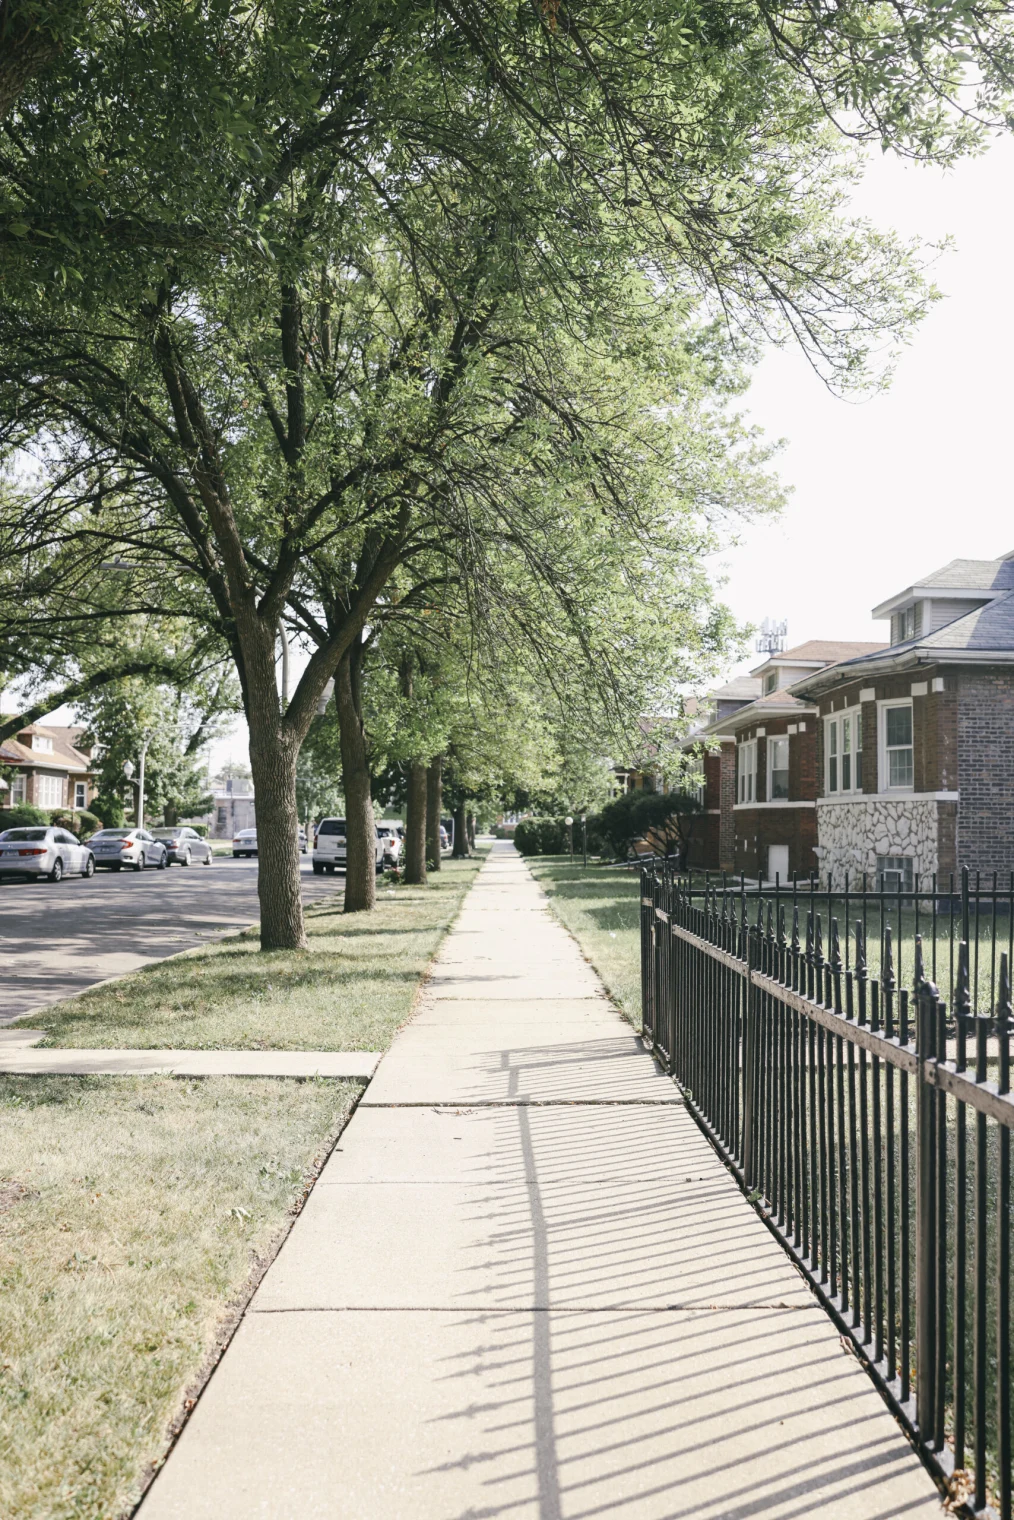 A view of a sidewalk in a neighborhood in Chicago